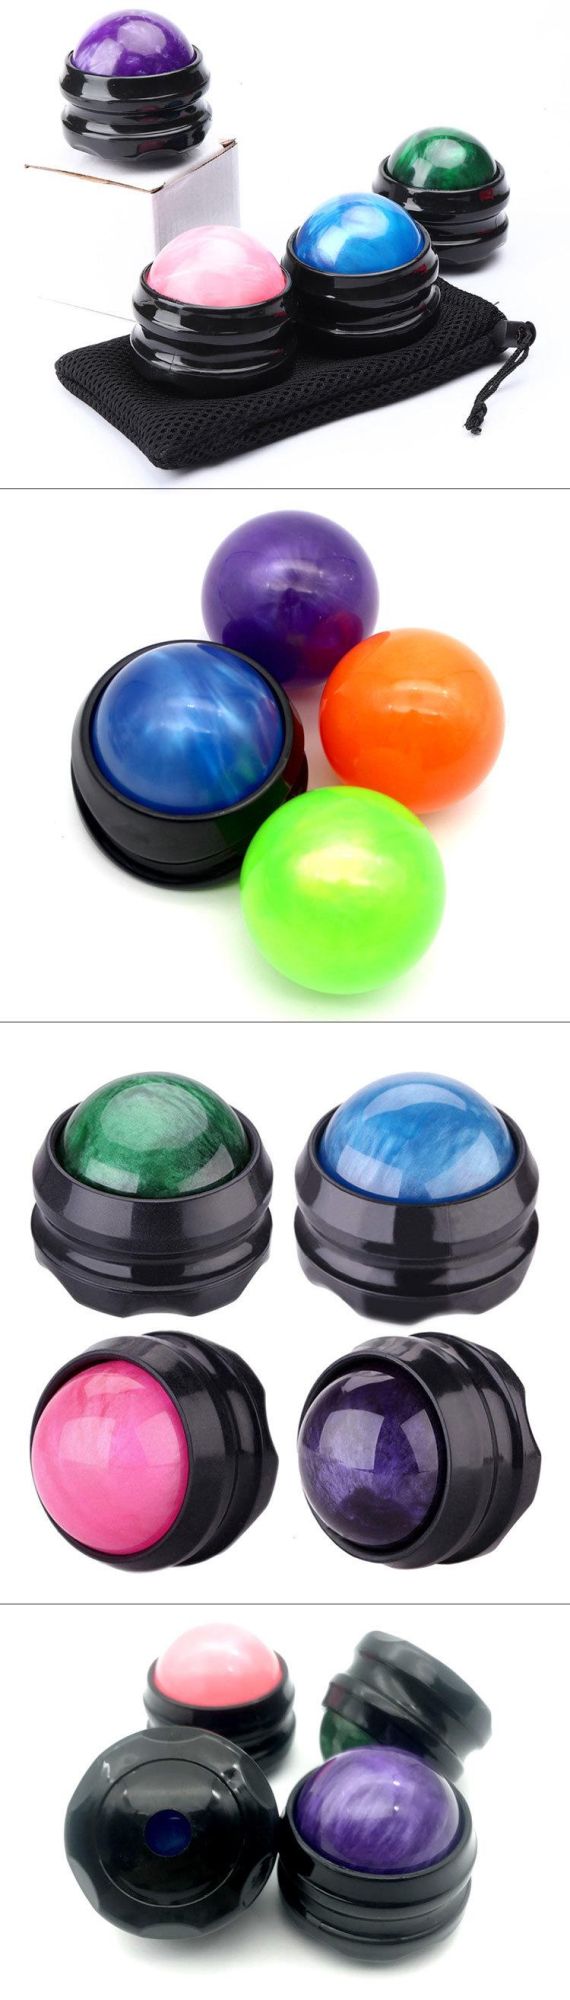 Factory New Product Pain Relief Ice Ball Roller Ball Massage